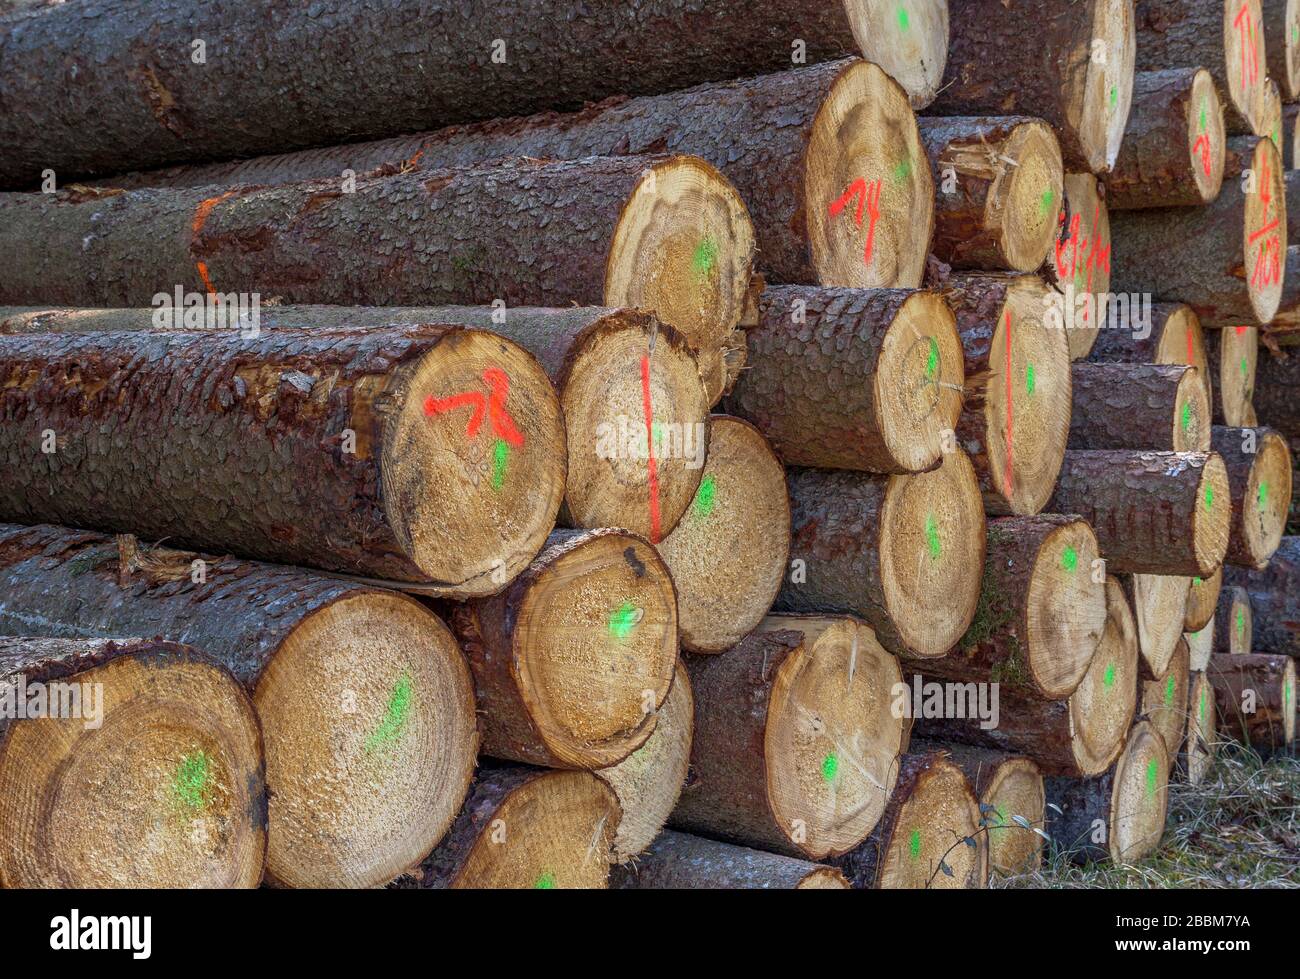 Wood industry, Stacked logs, Bavaria, Germany, Europe Stock Photo